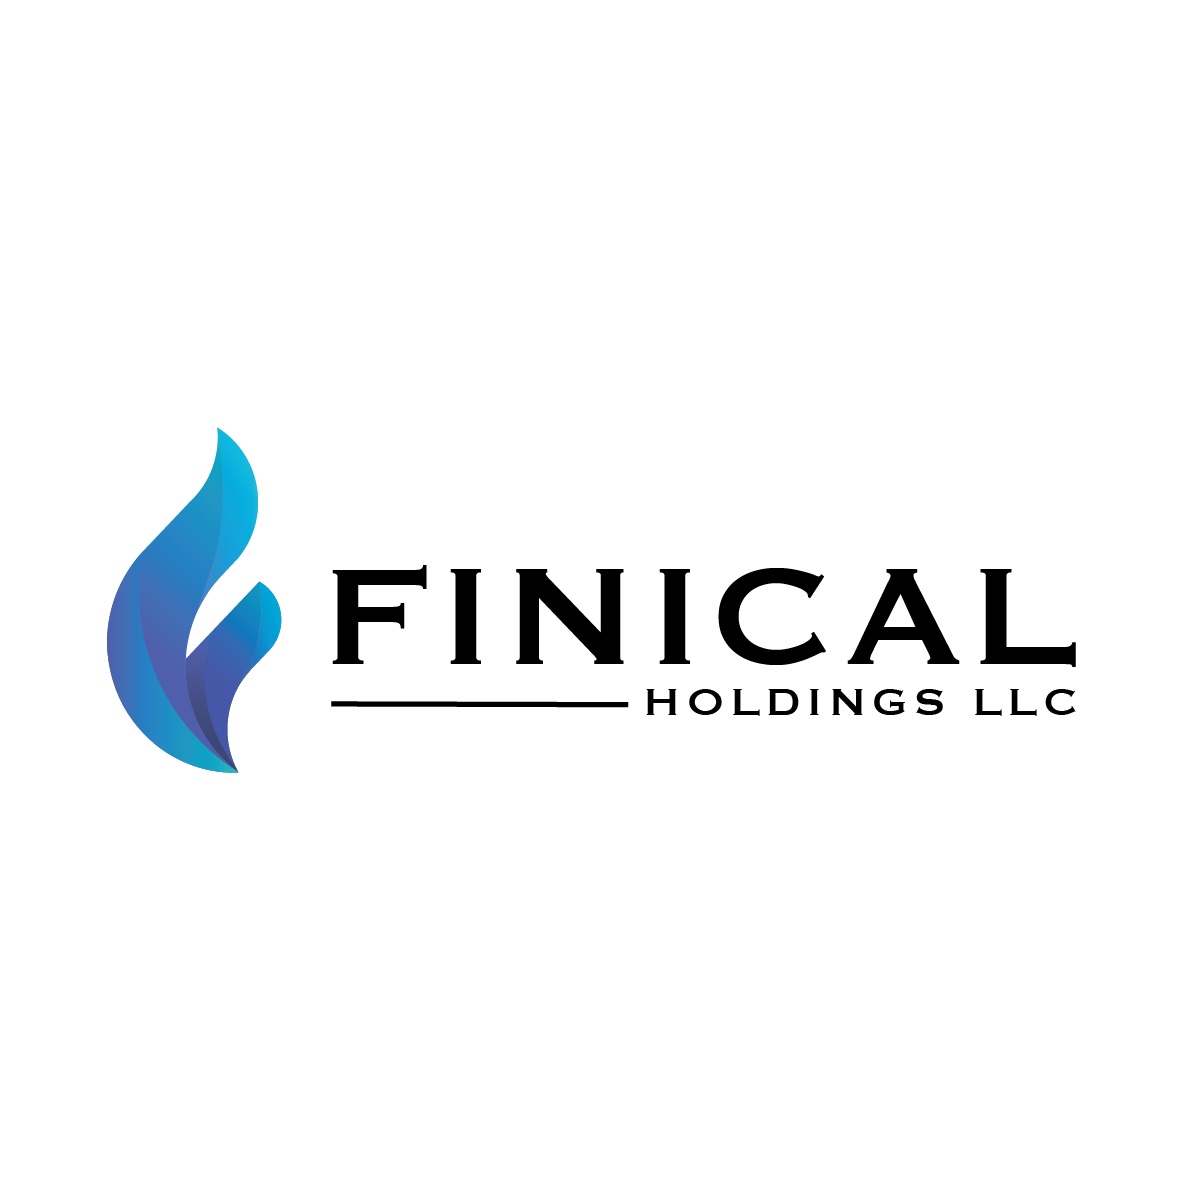 Featured Image for Finical Holdings, LLC.